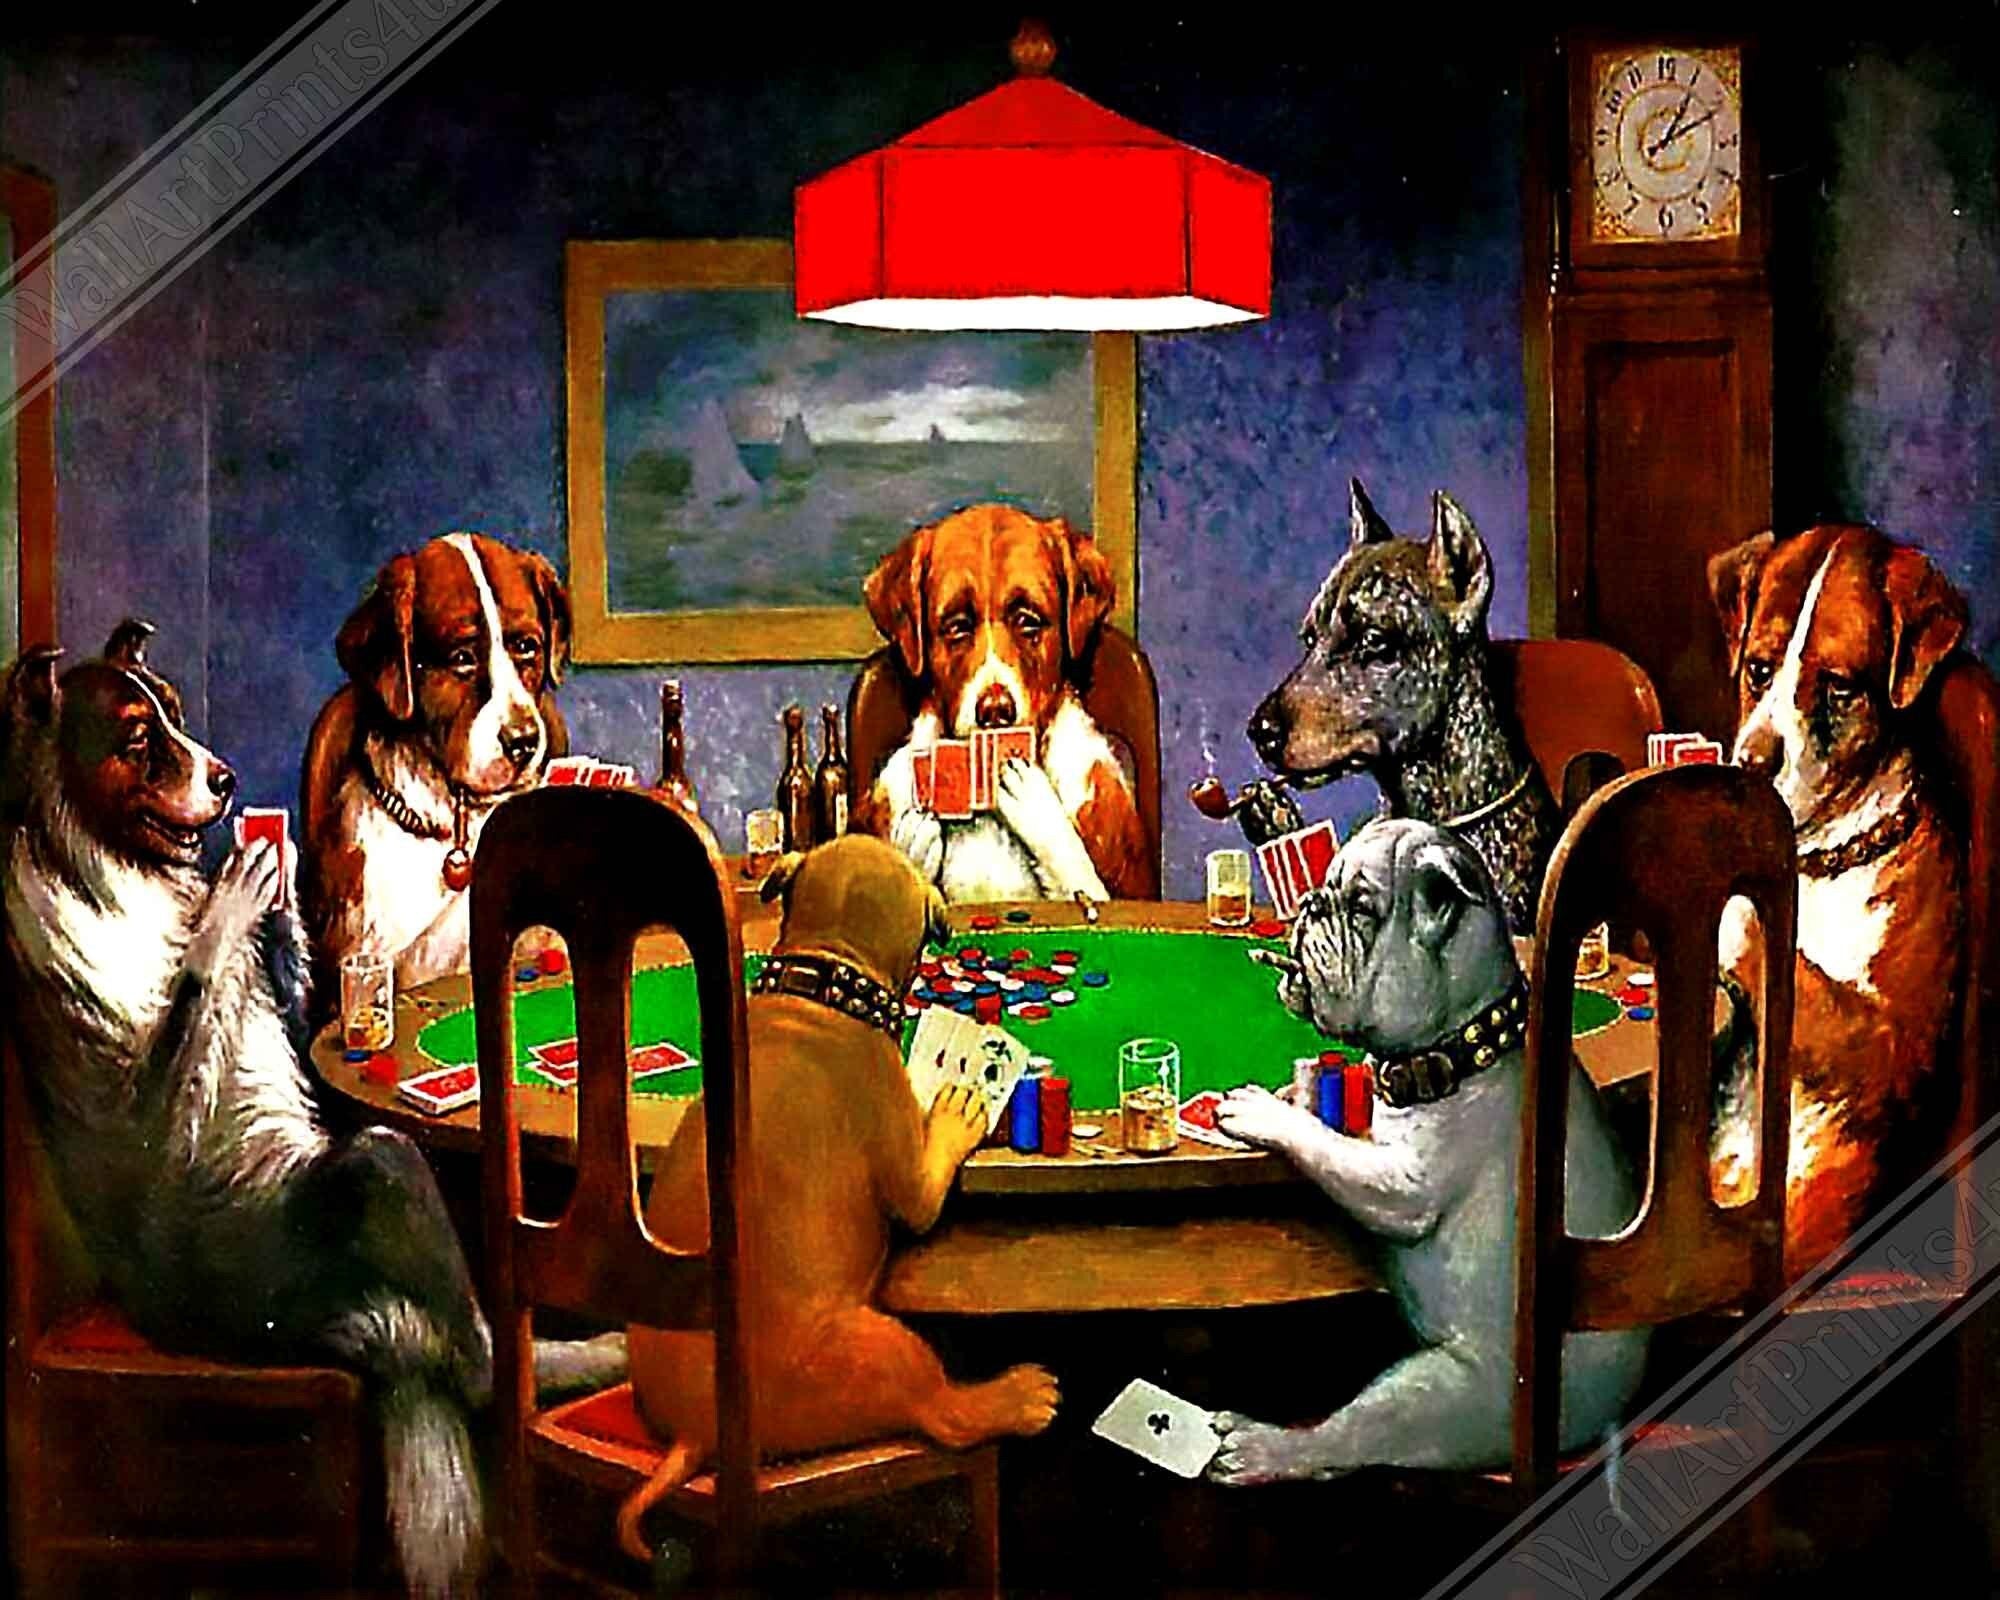 Friend In Need Poster, Dogs Playing Poker Poster - Friend In Need Print - Cassius Marcellus Coolidge - WallArtPrints4U